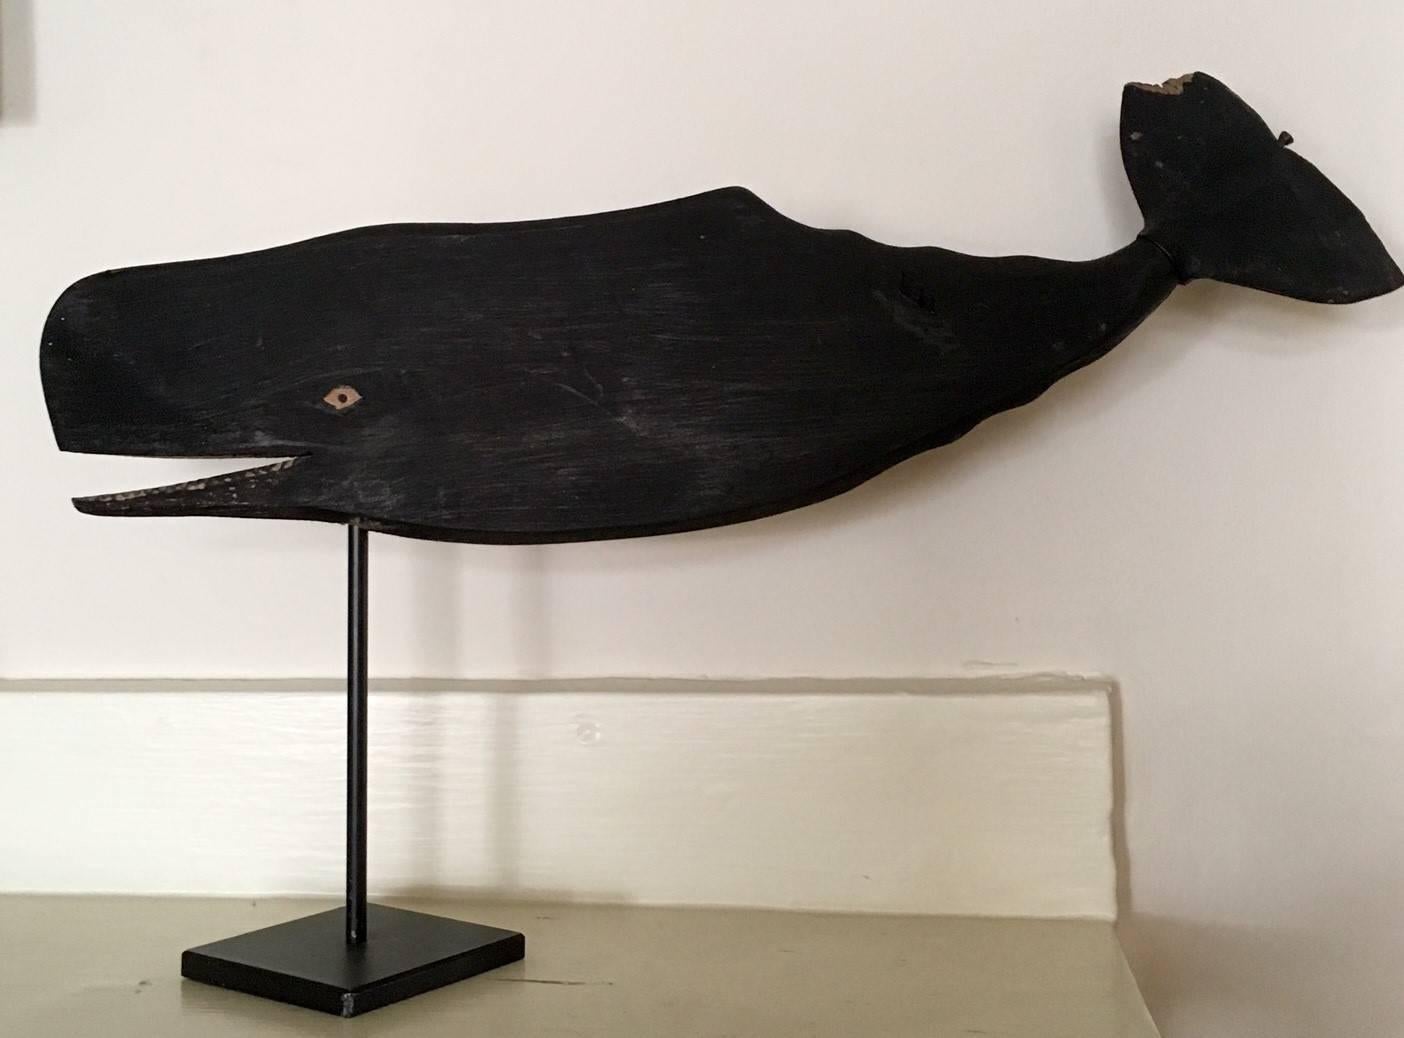 Nantucket Sperm Whale Weather Vane Whirligig, having slender hand-whittled flukes with great graceful curve, and carved teeth. The flukes are free to spin with the wind. Note there is charismatic chip to the tip of one fluke. In original black paint.